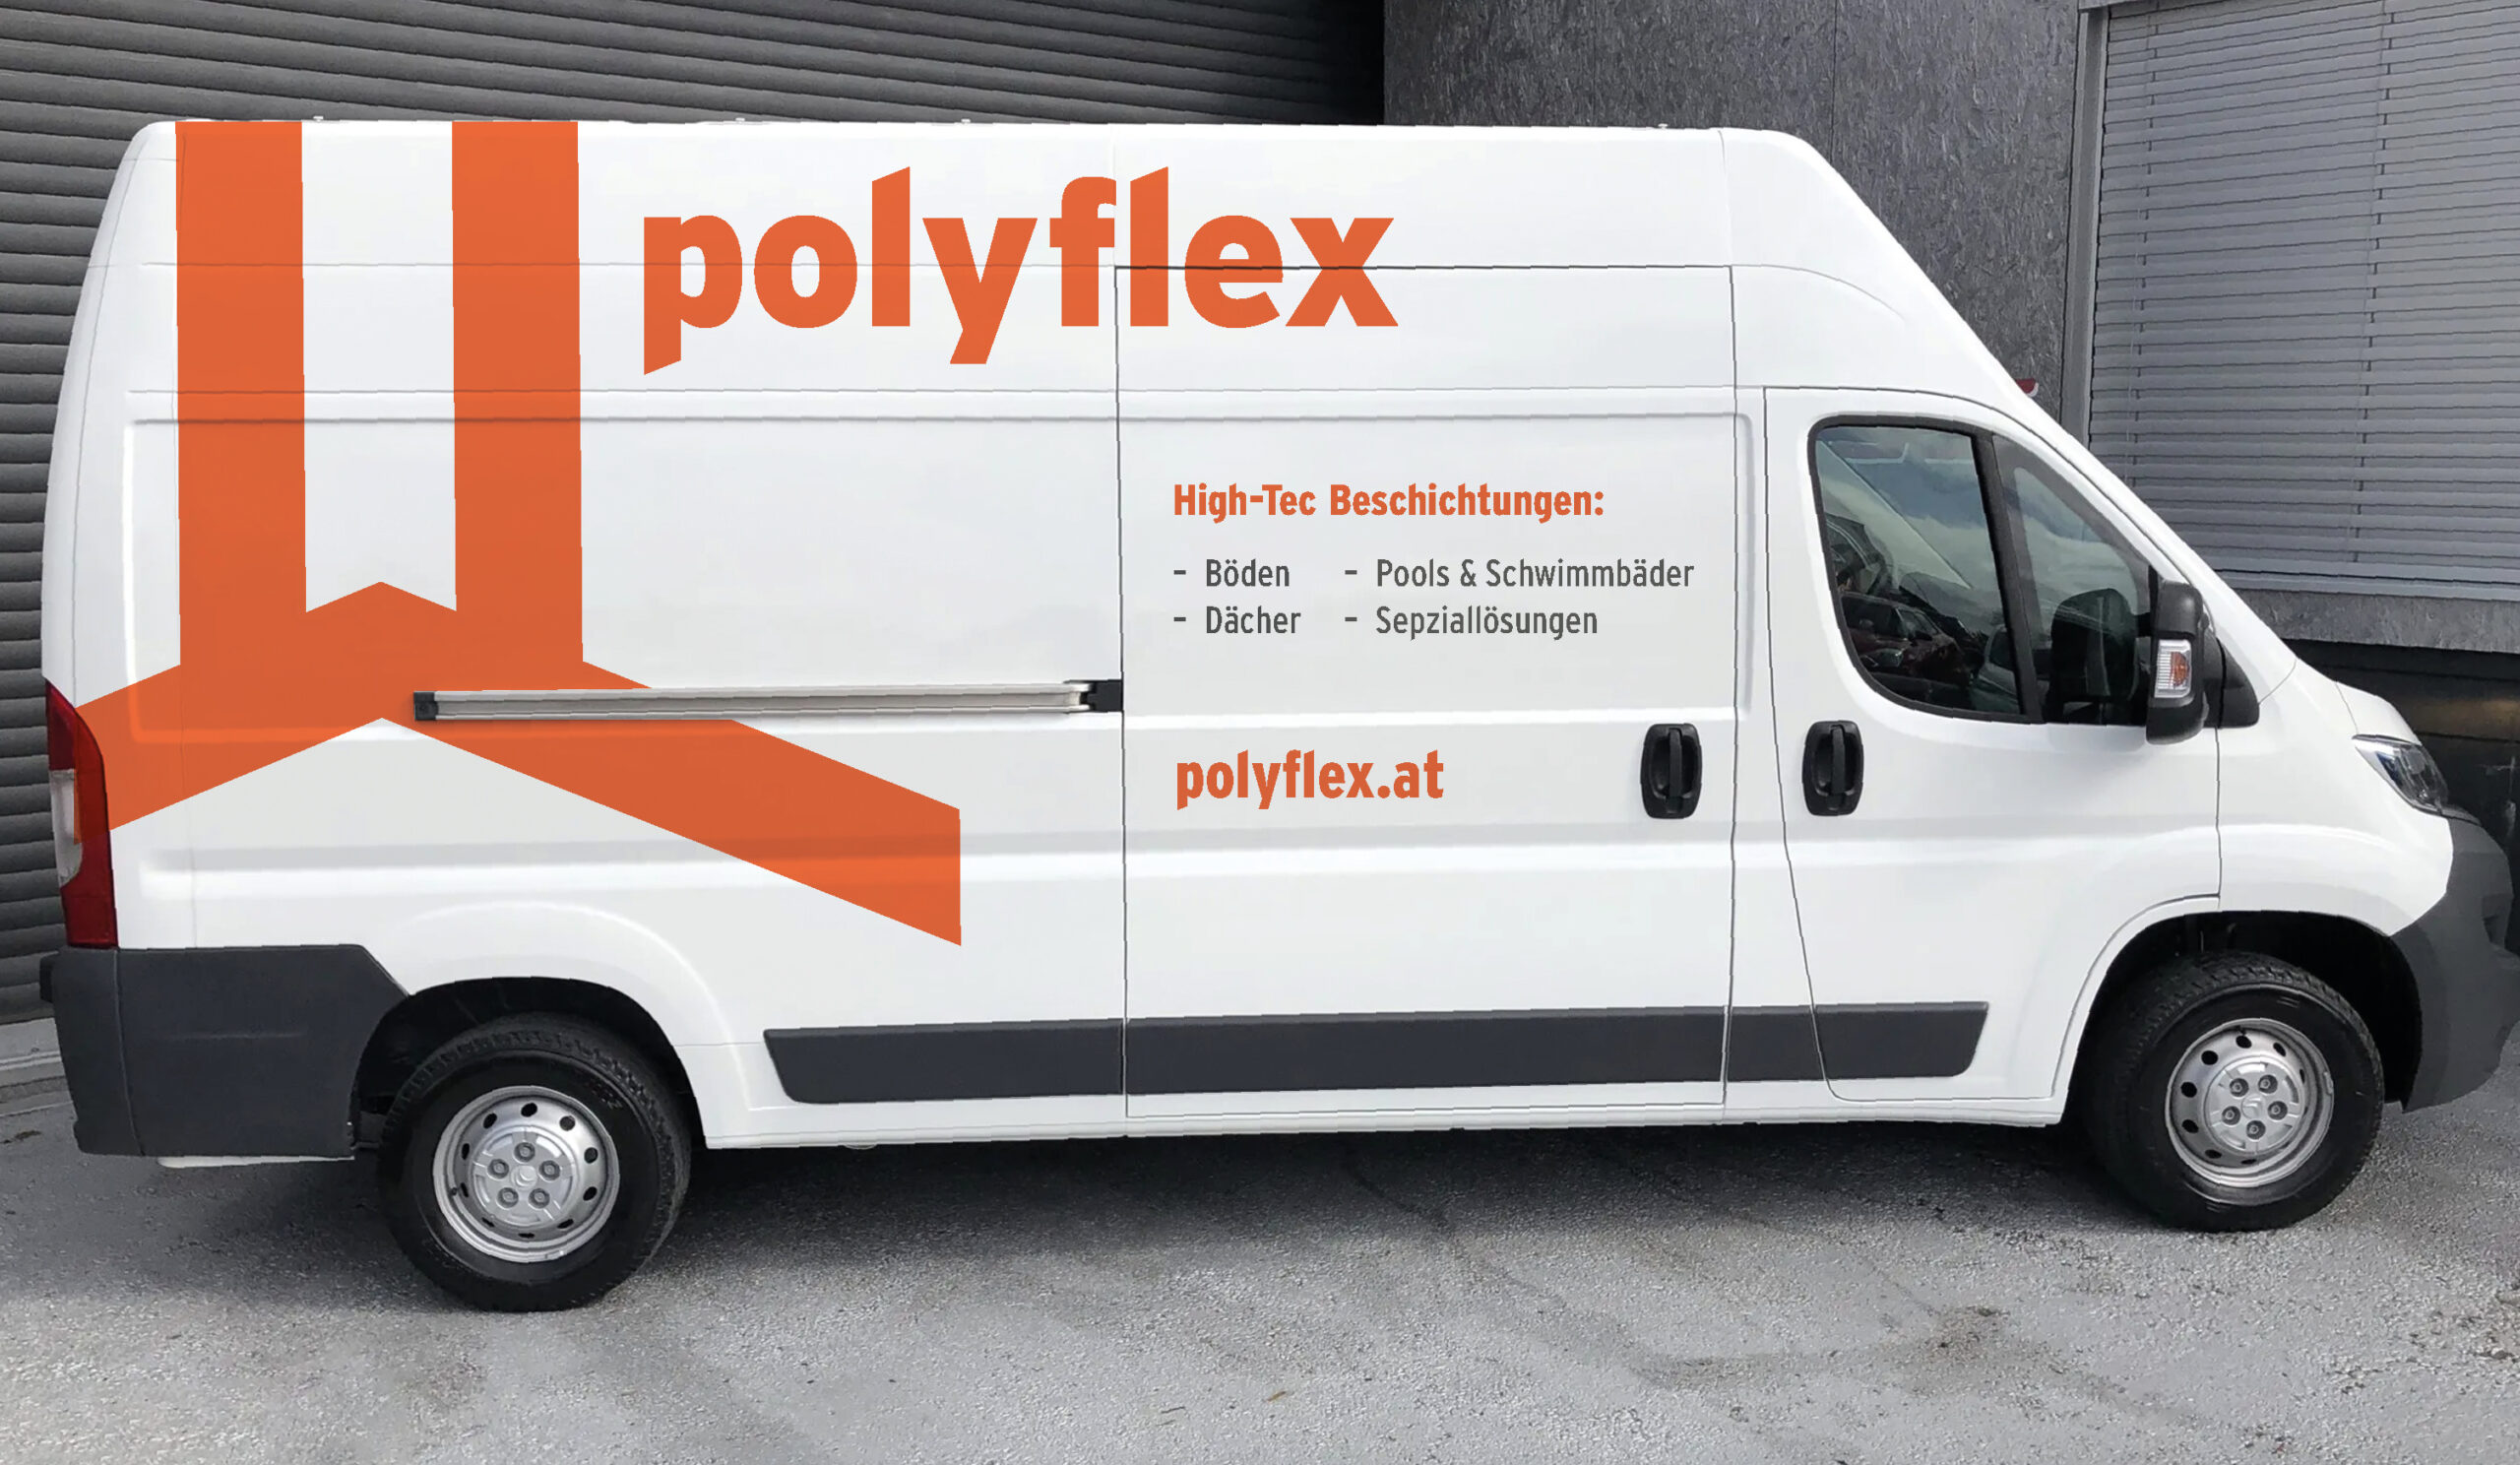 A van featuring the word Polyflex prominently on its surface.